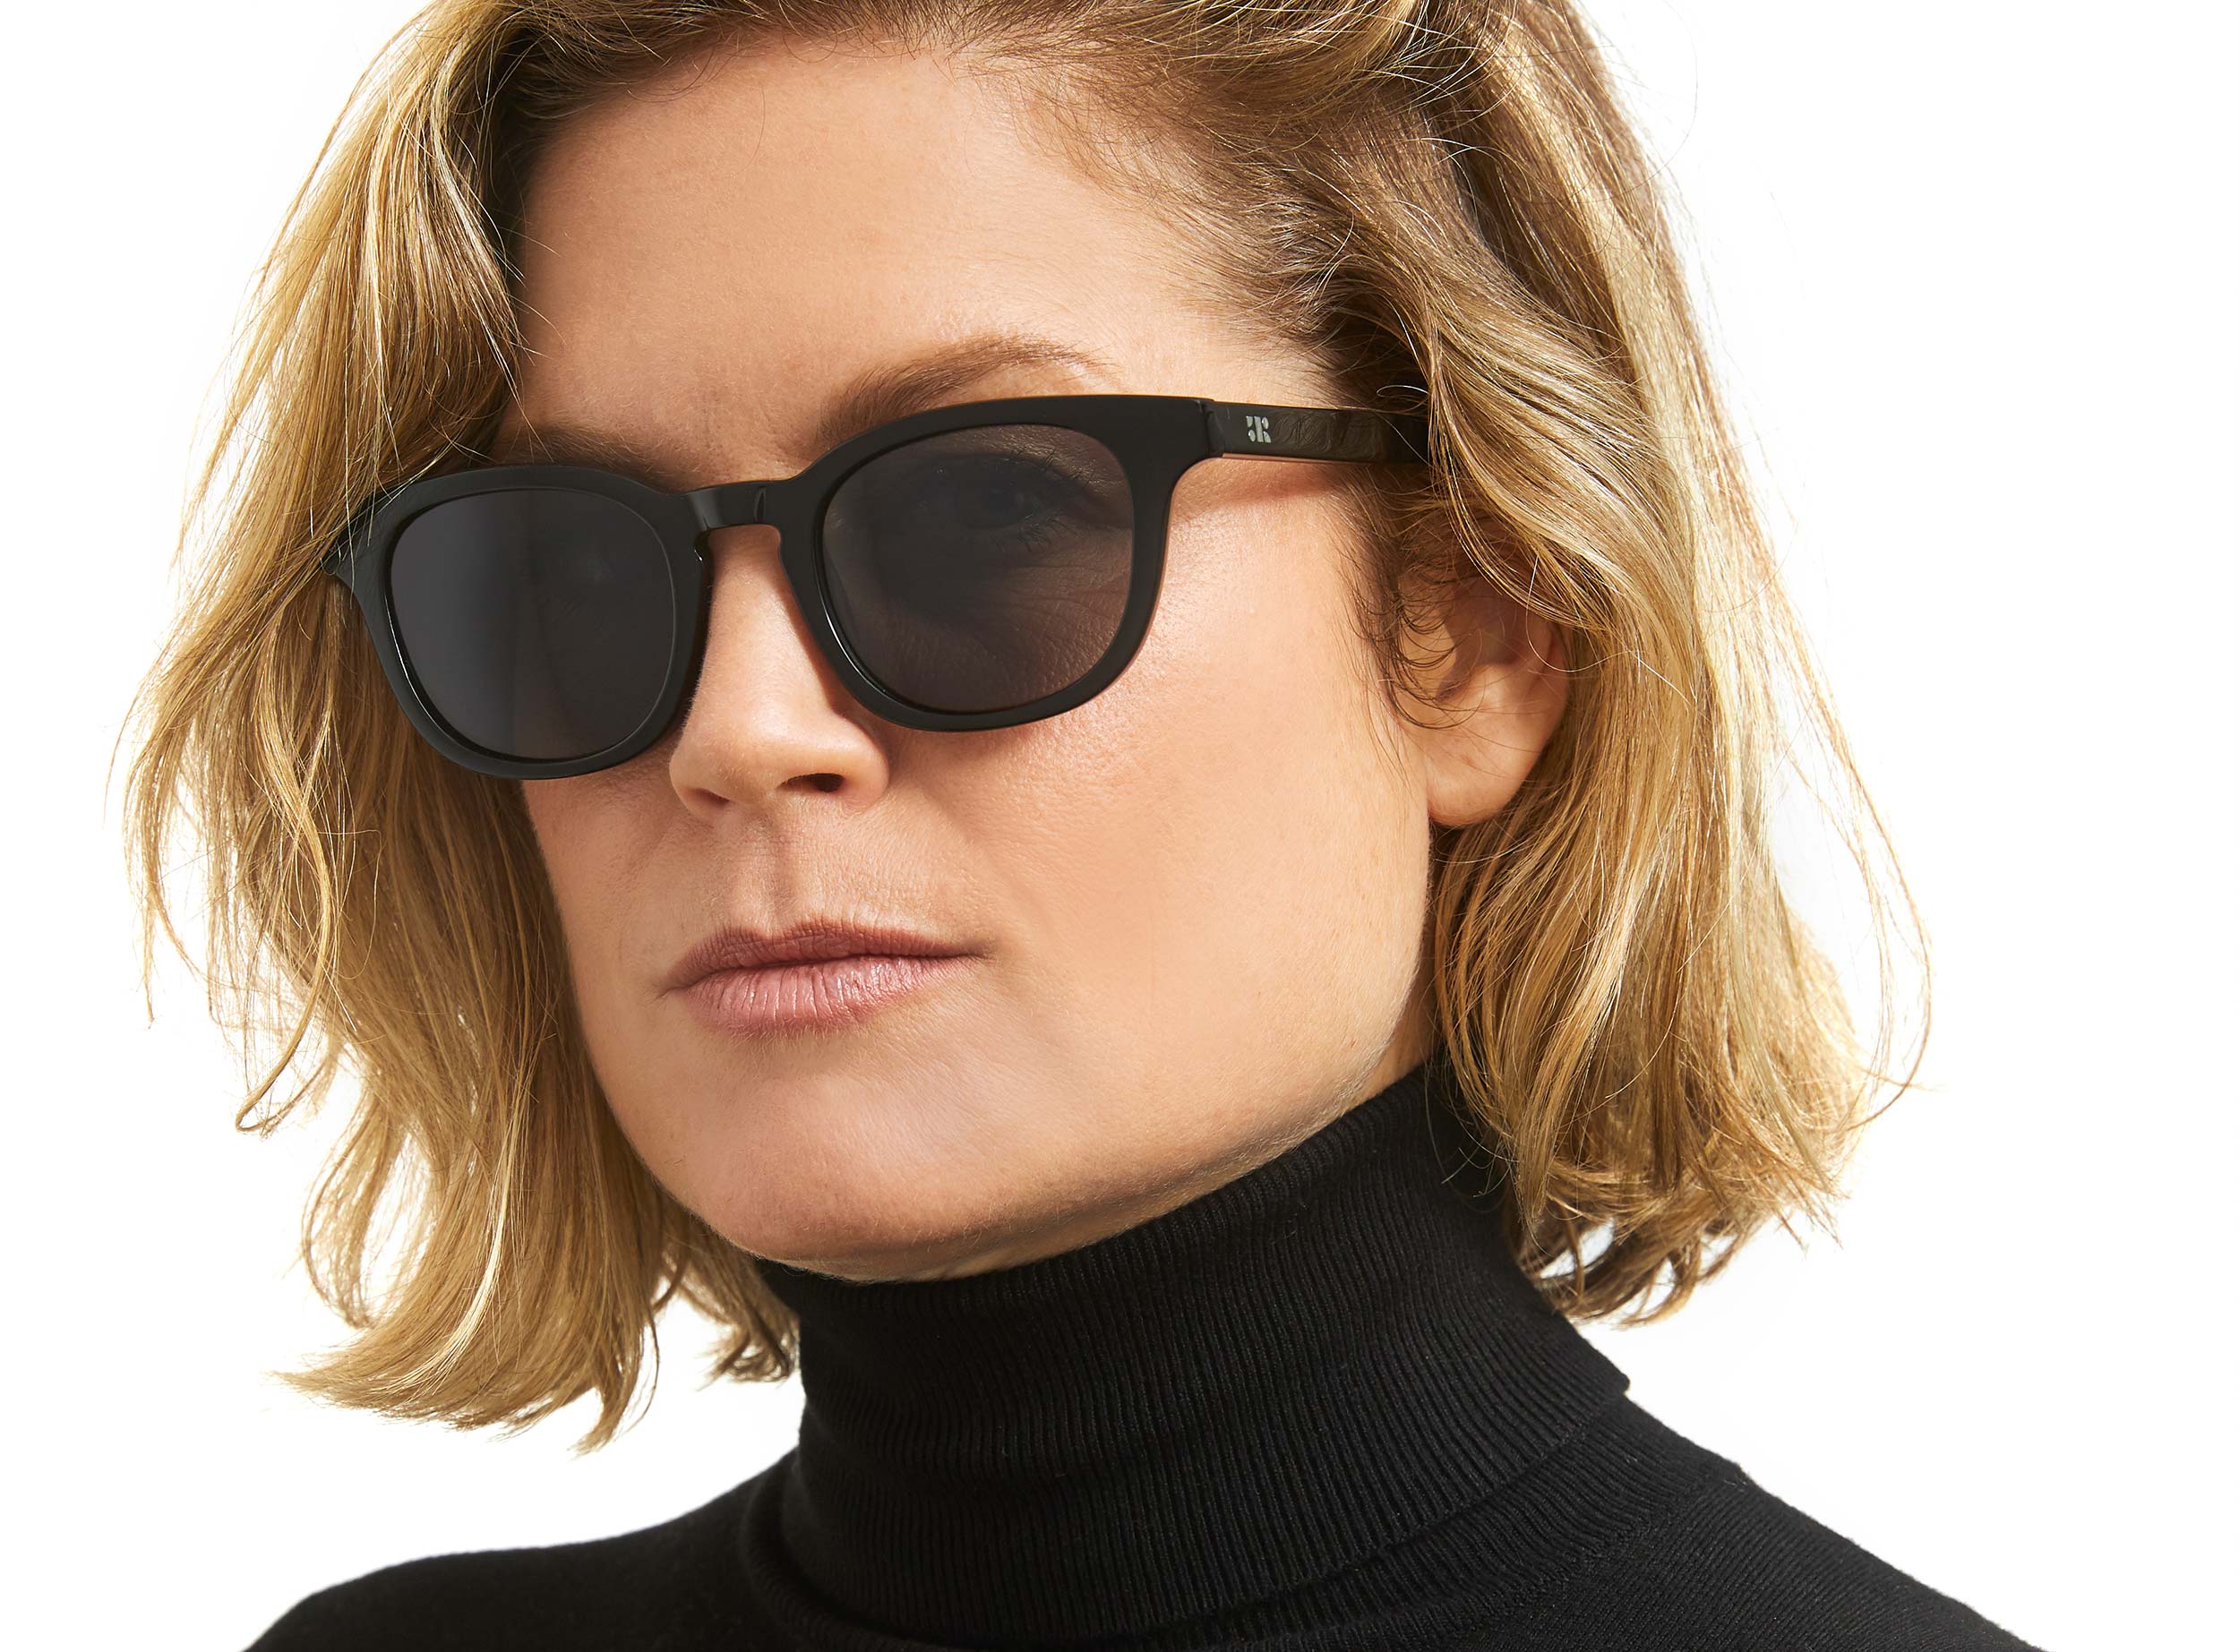 Photo of a man or woman wearing Sinclair Sun Tortoise Sun Glasses by French Kiwis